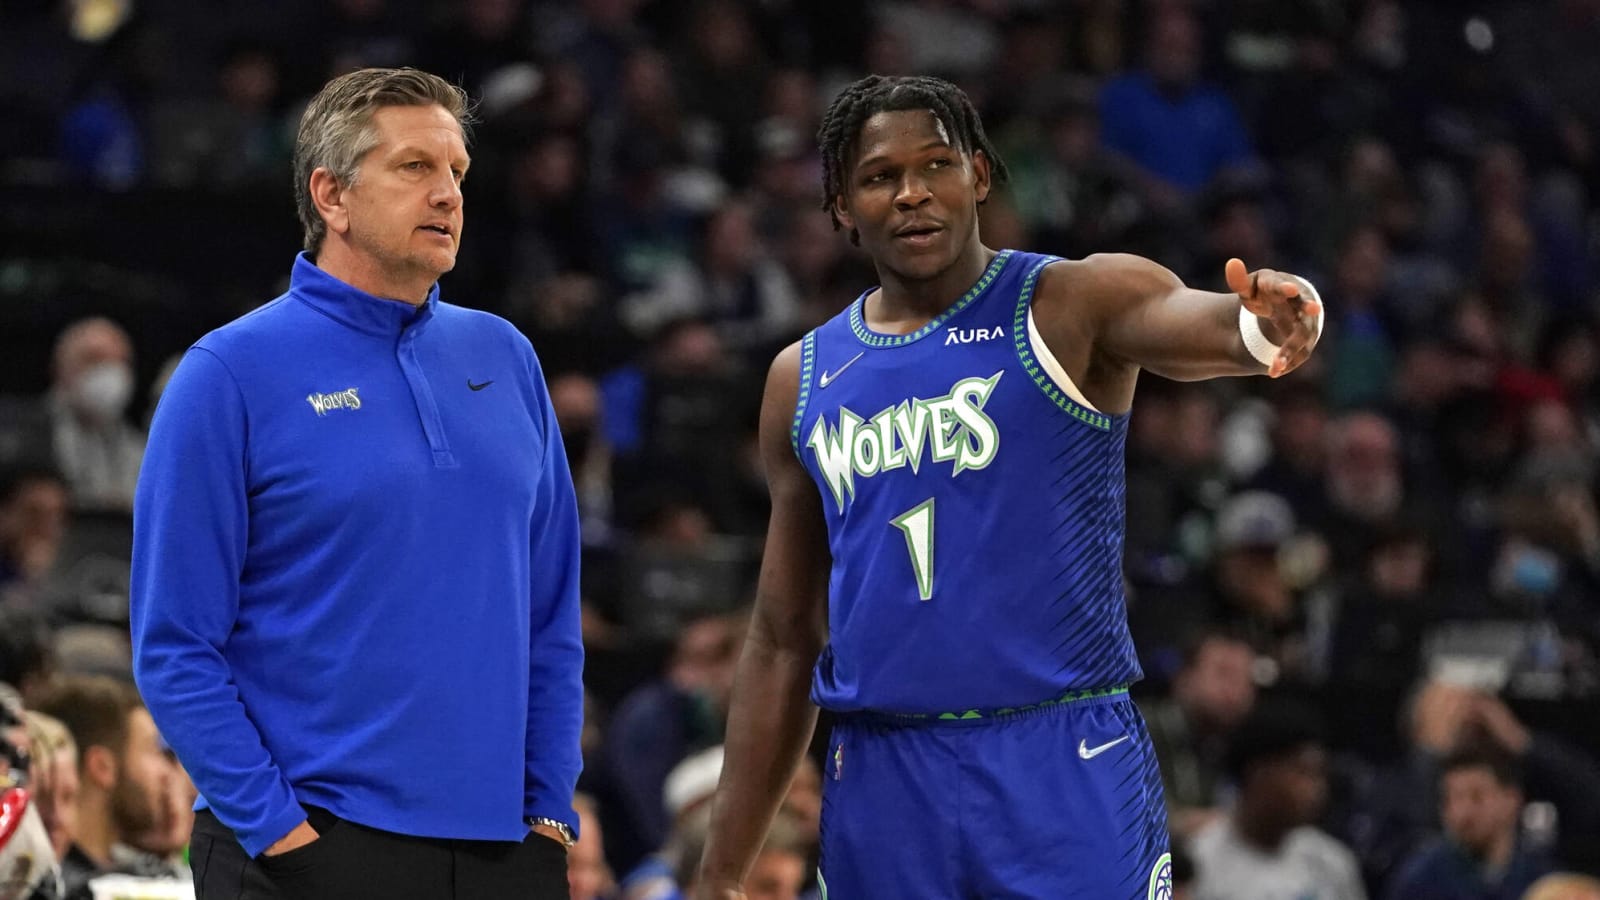 Edwards heaps praise on Timberwolves HC after Game 7 win over Nuggets